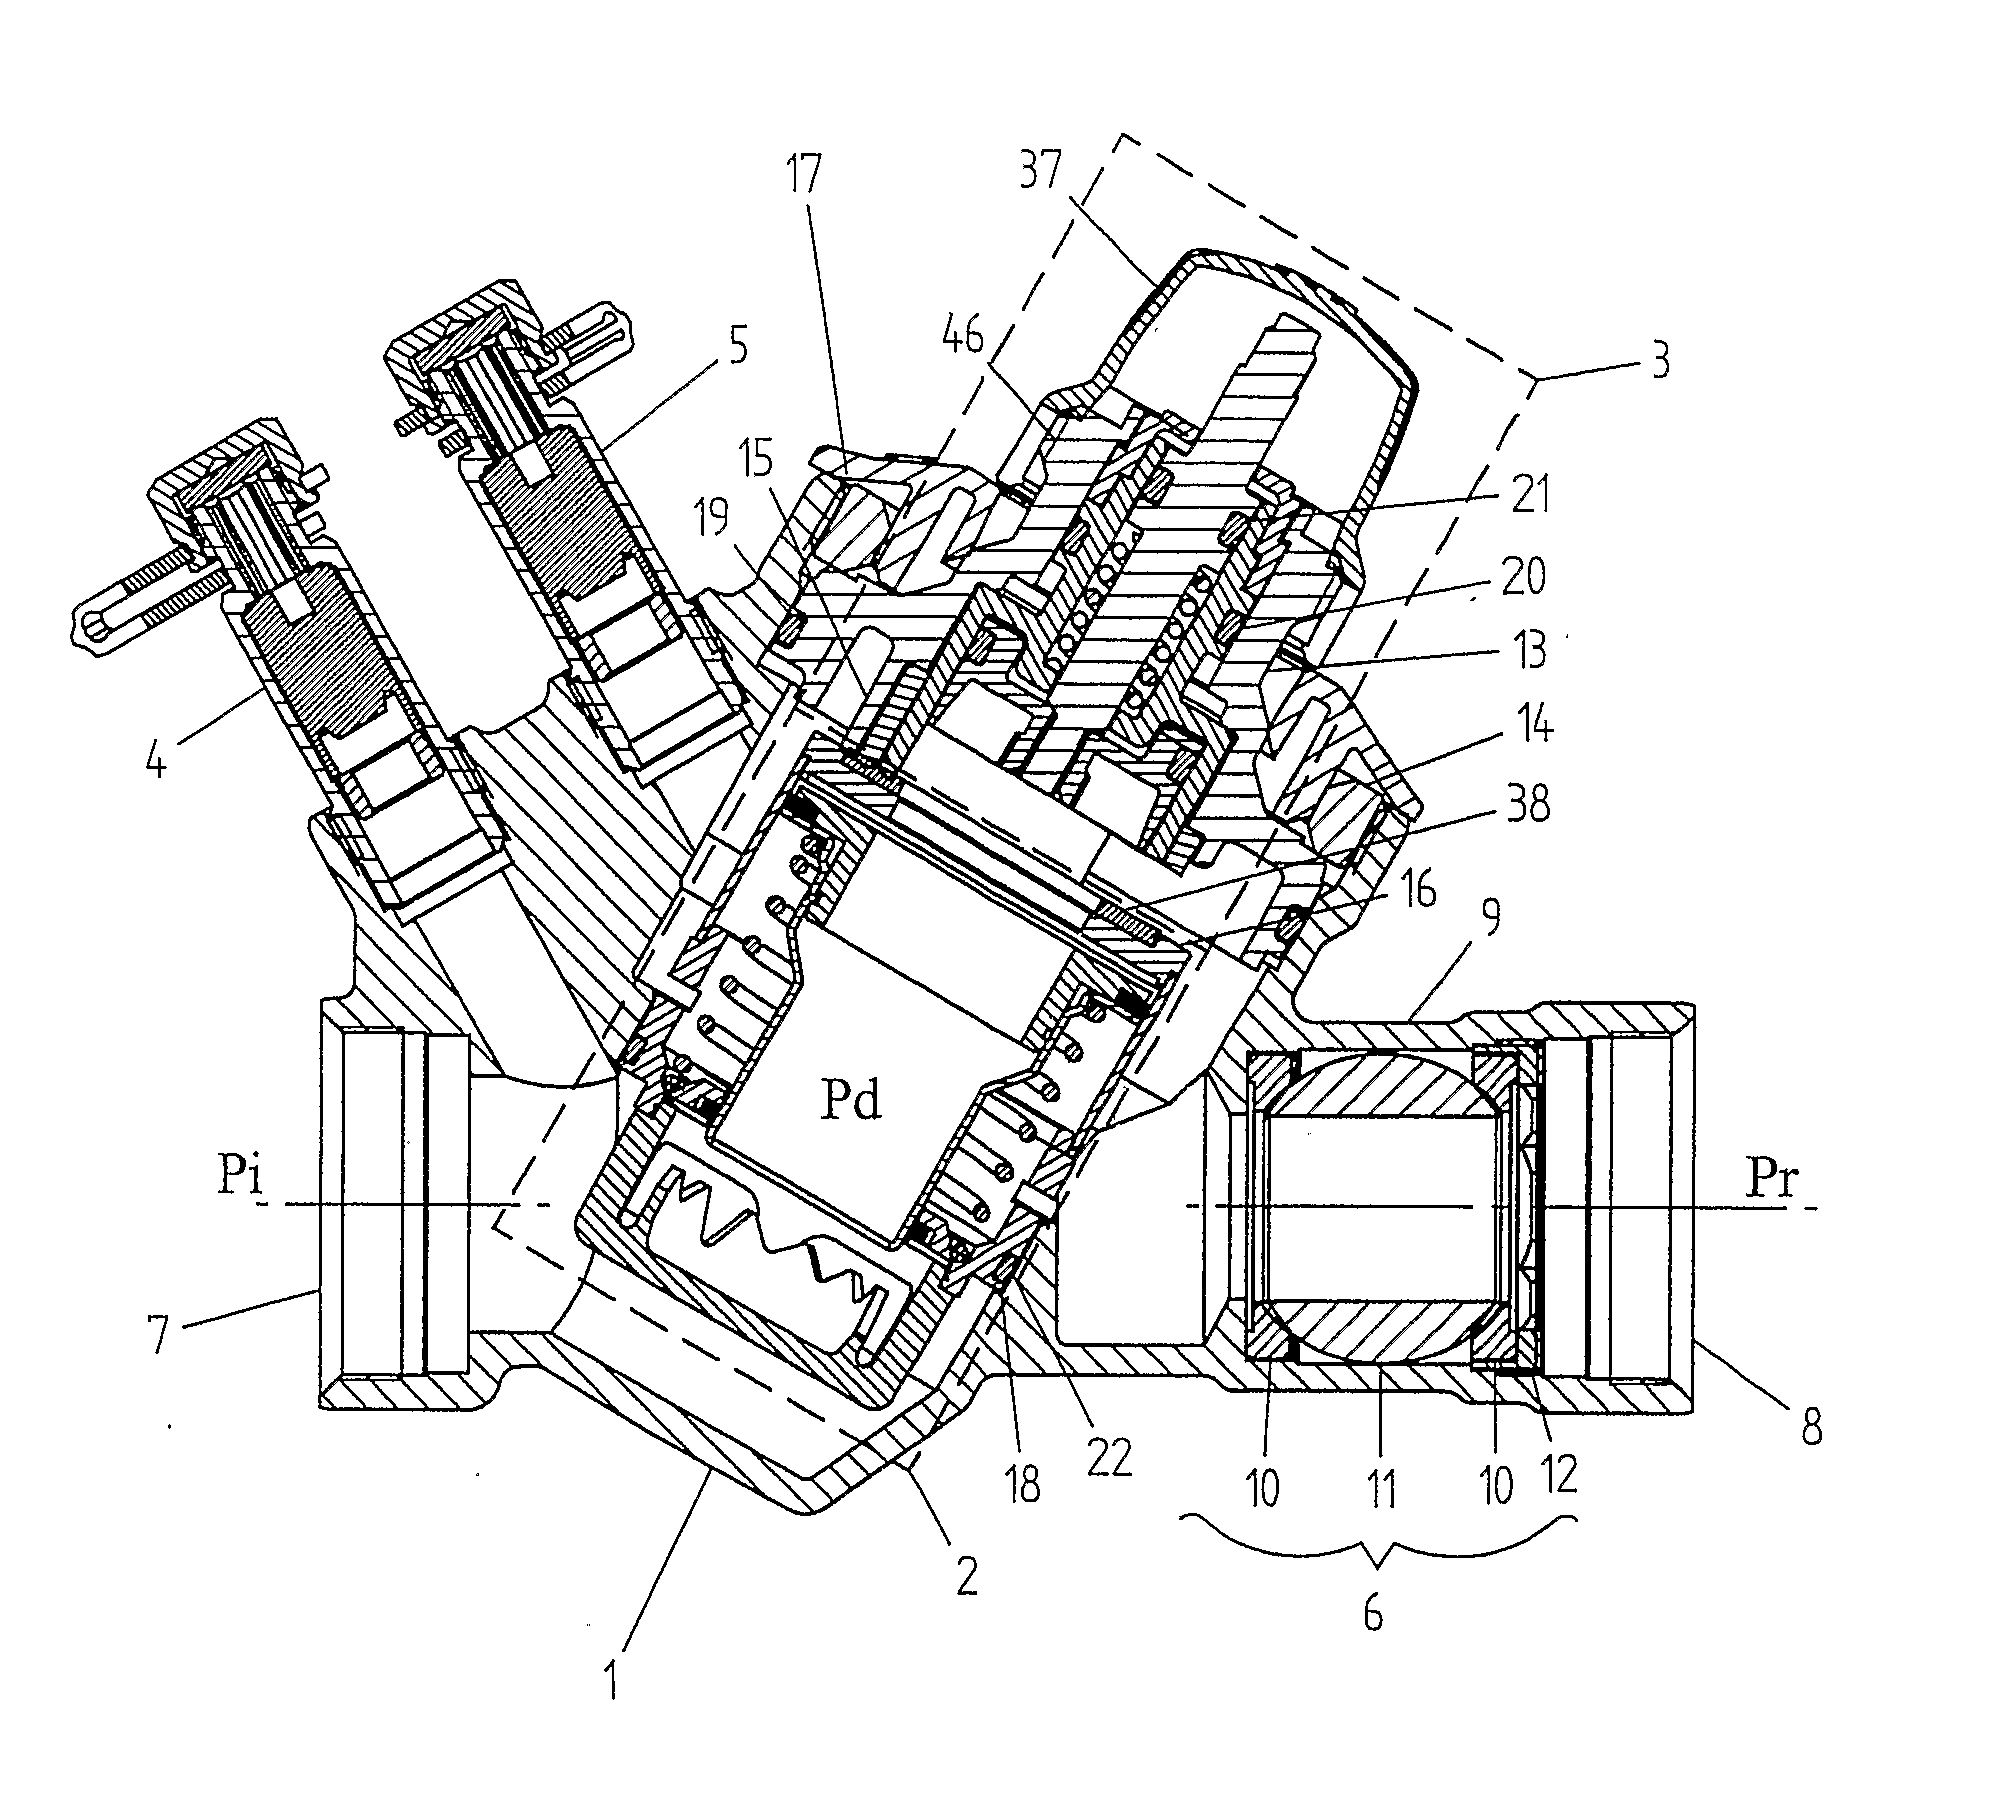 Apparatus for Regulating Flow of a Medium in a Heating and Cooling System